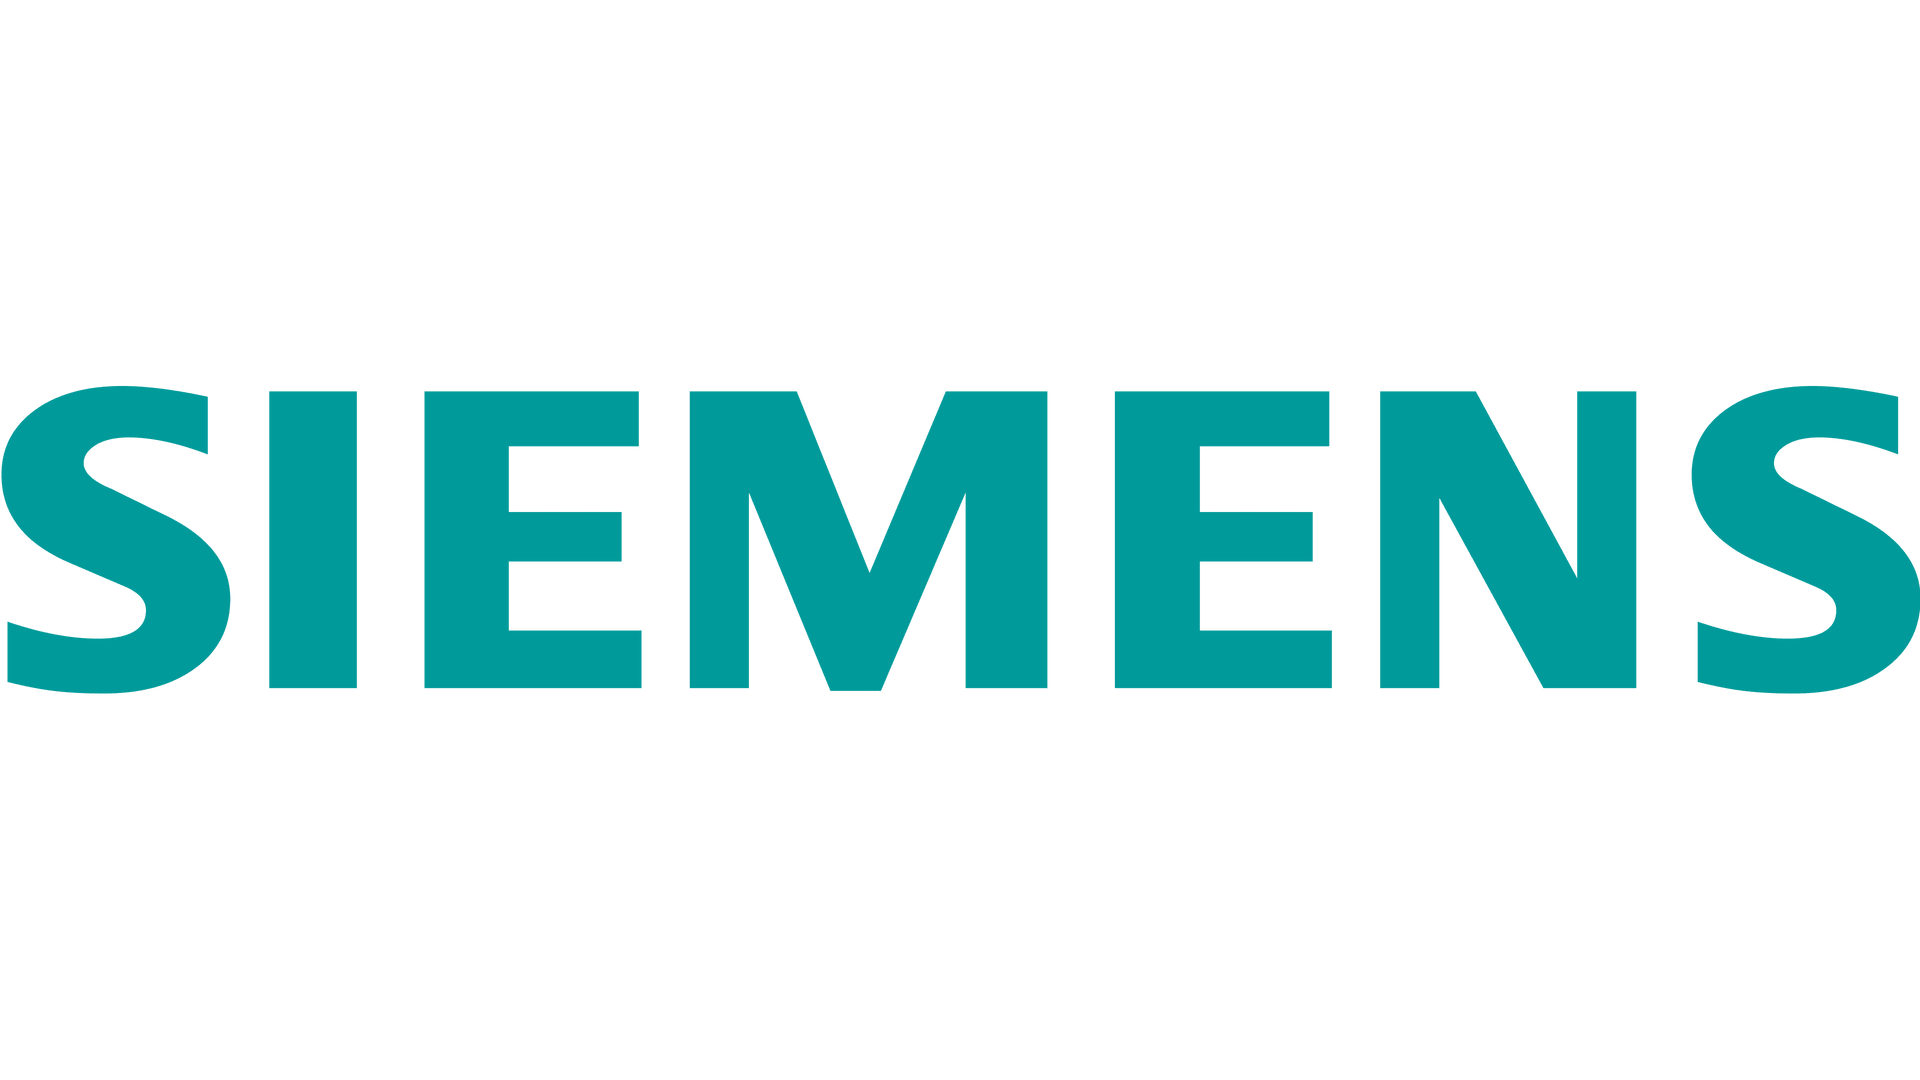 ALPHA AUTOMATION is proud to partner with siemens